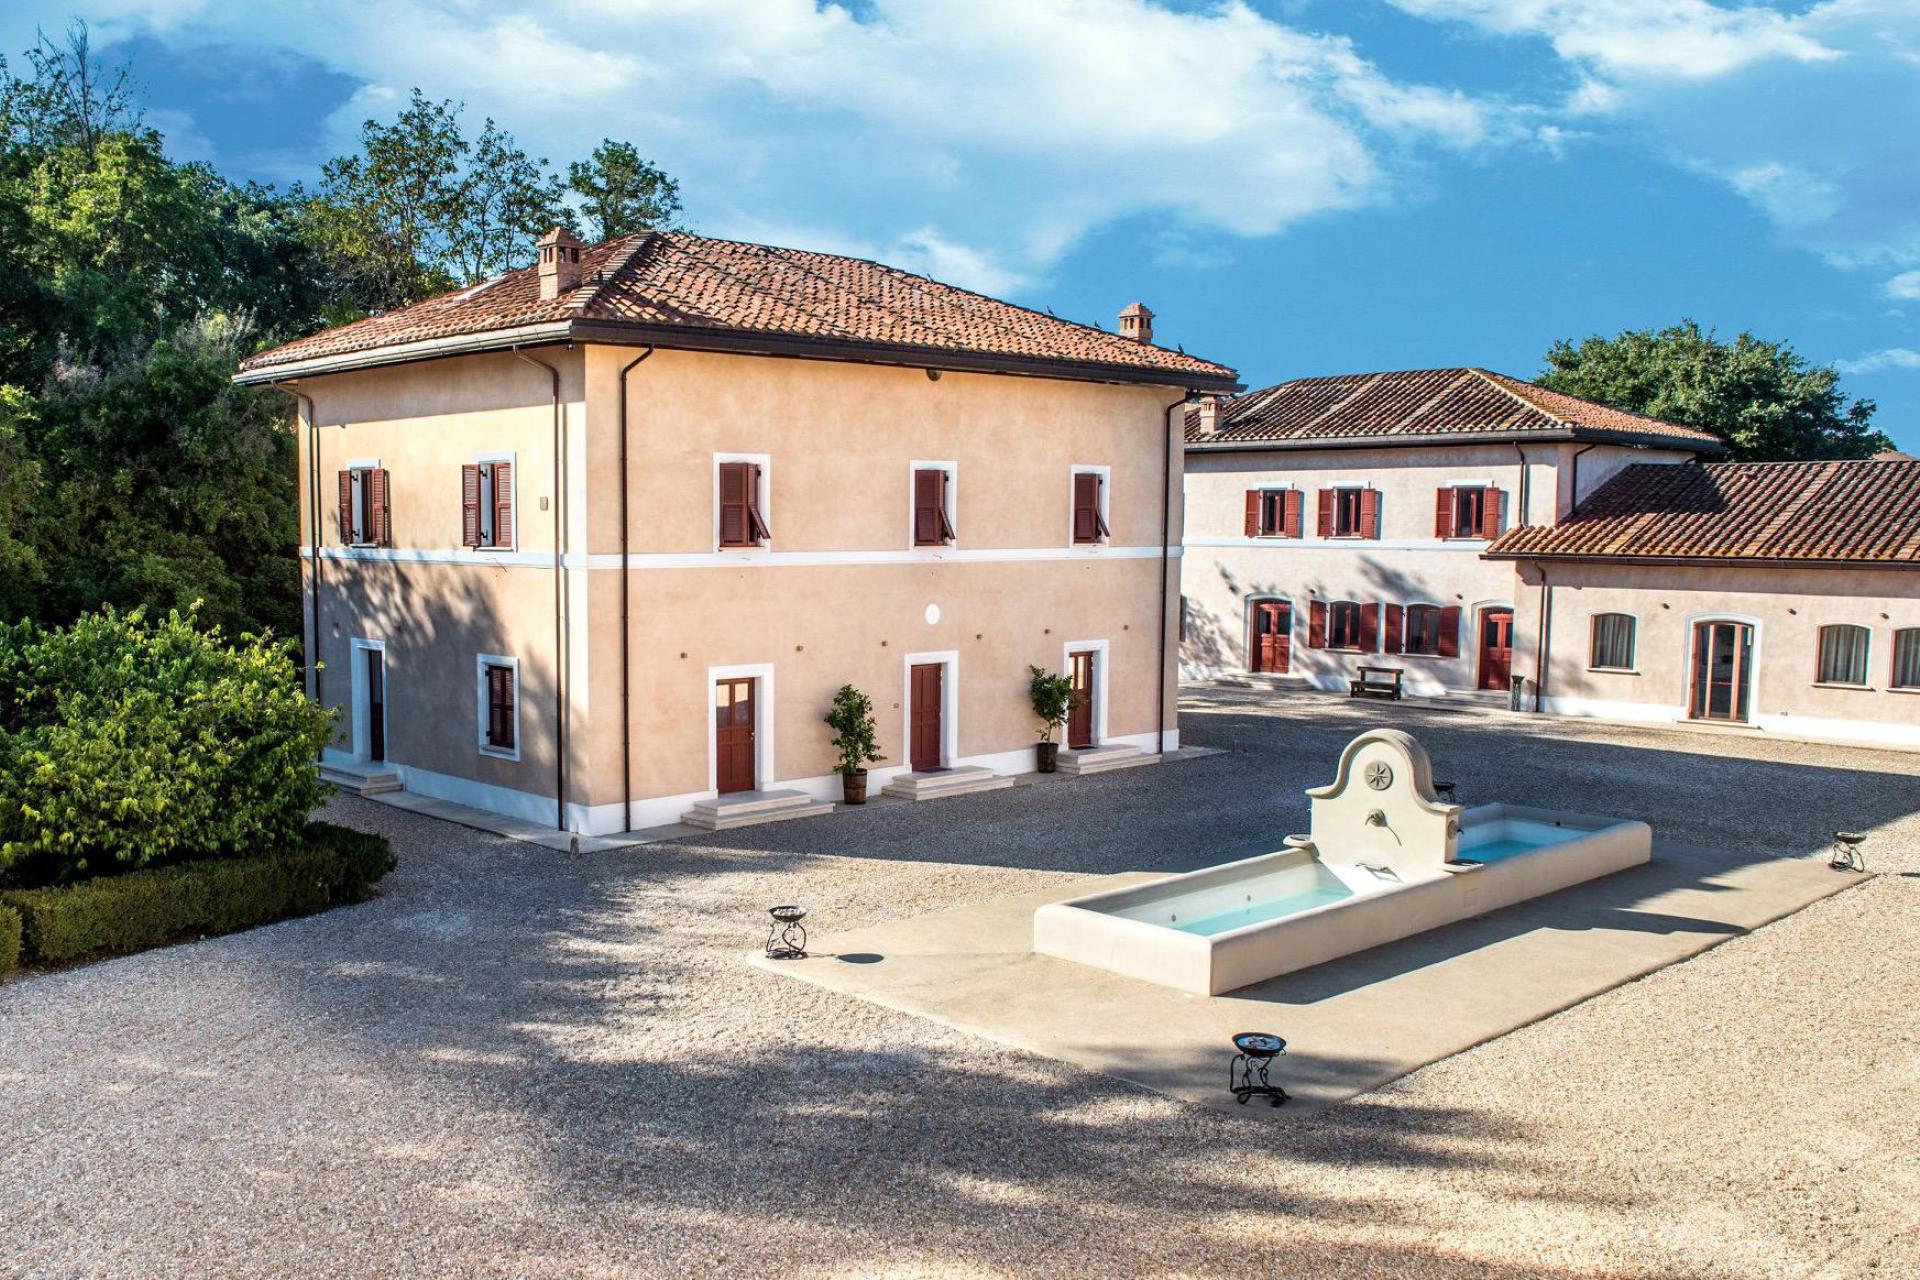 Agriturismo Rome Luxury agriturismo near Rome with restaurant and swimming pool